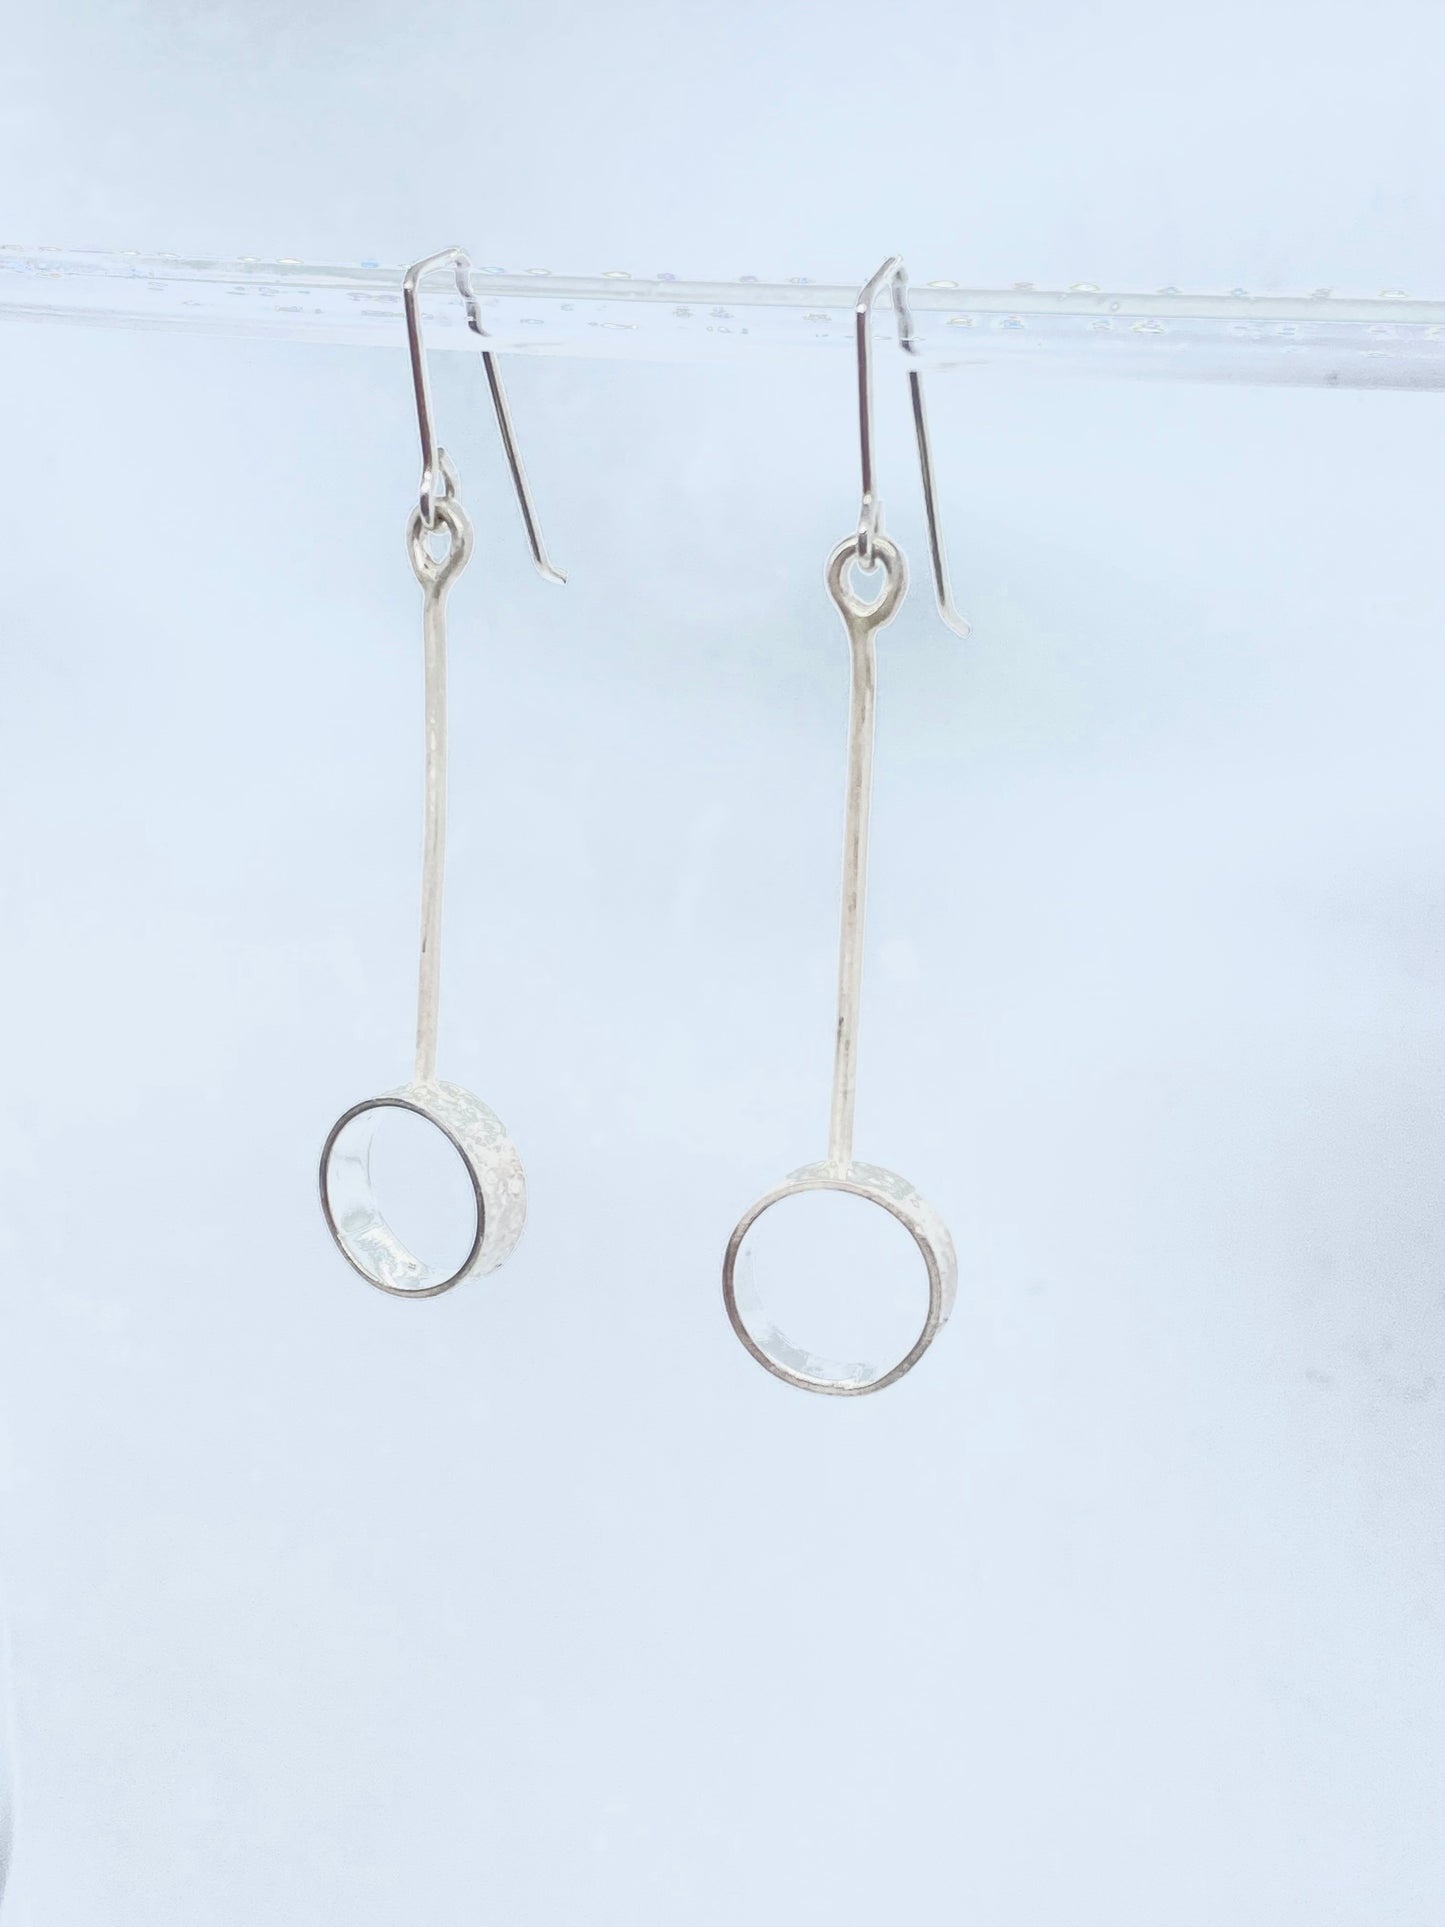 Earrings - Silver Textured Small Circle on Bar (#139)